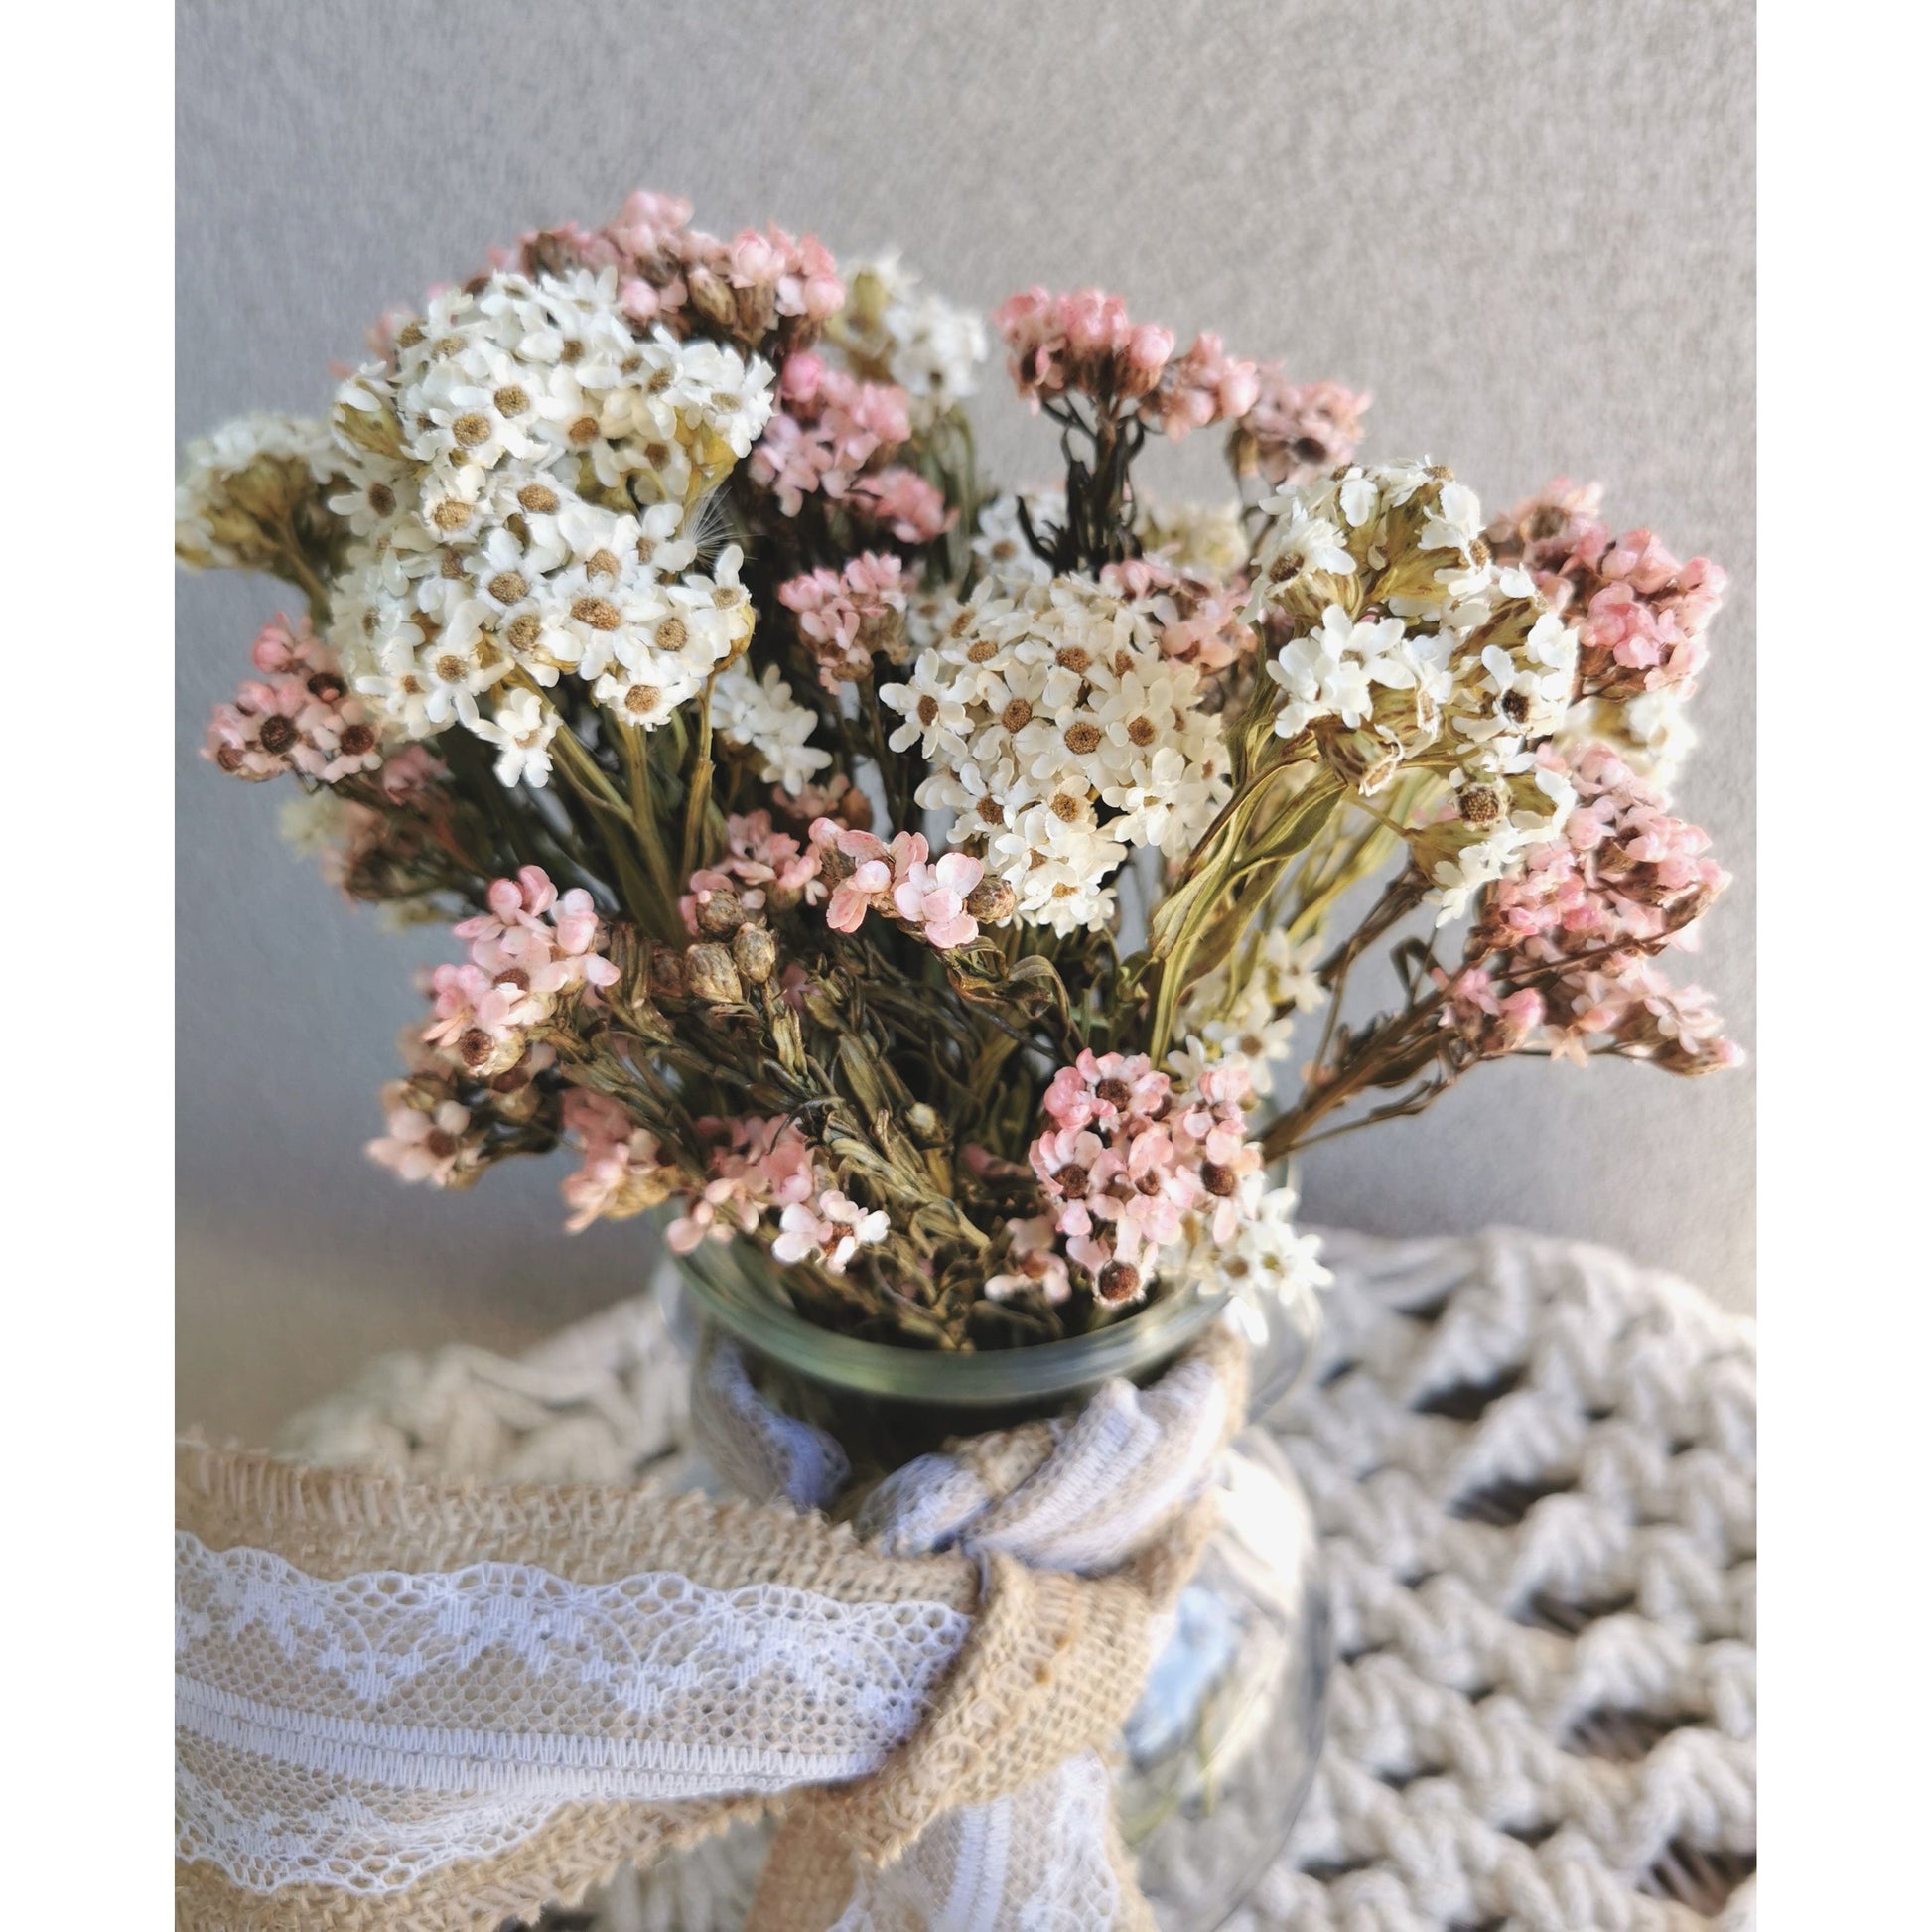 Dried pink & white oxeye daisy flowers in glass vase with lace hessian ribbon weaved through handles of vase. Picture shows arrangement sitting on table against a blank wall with a close up view of the flowers